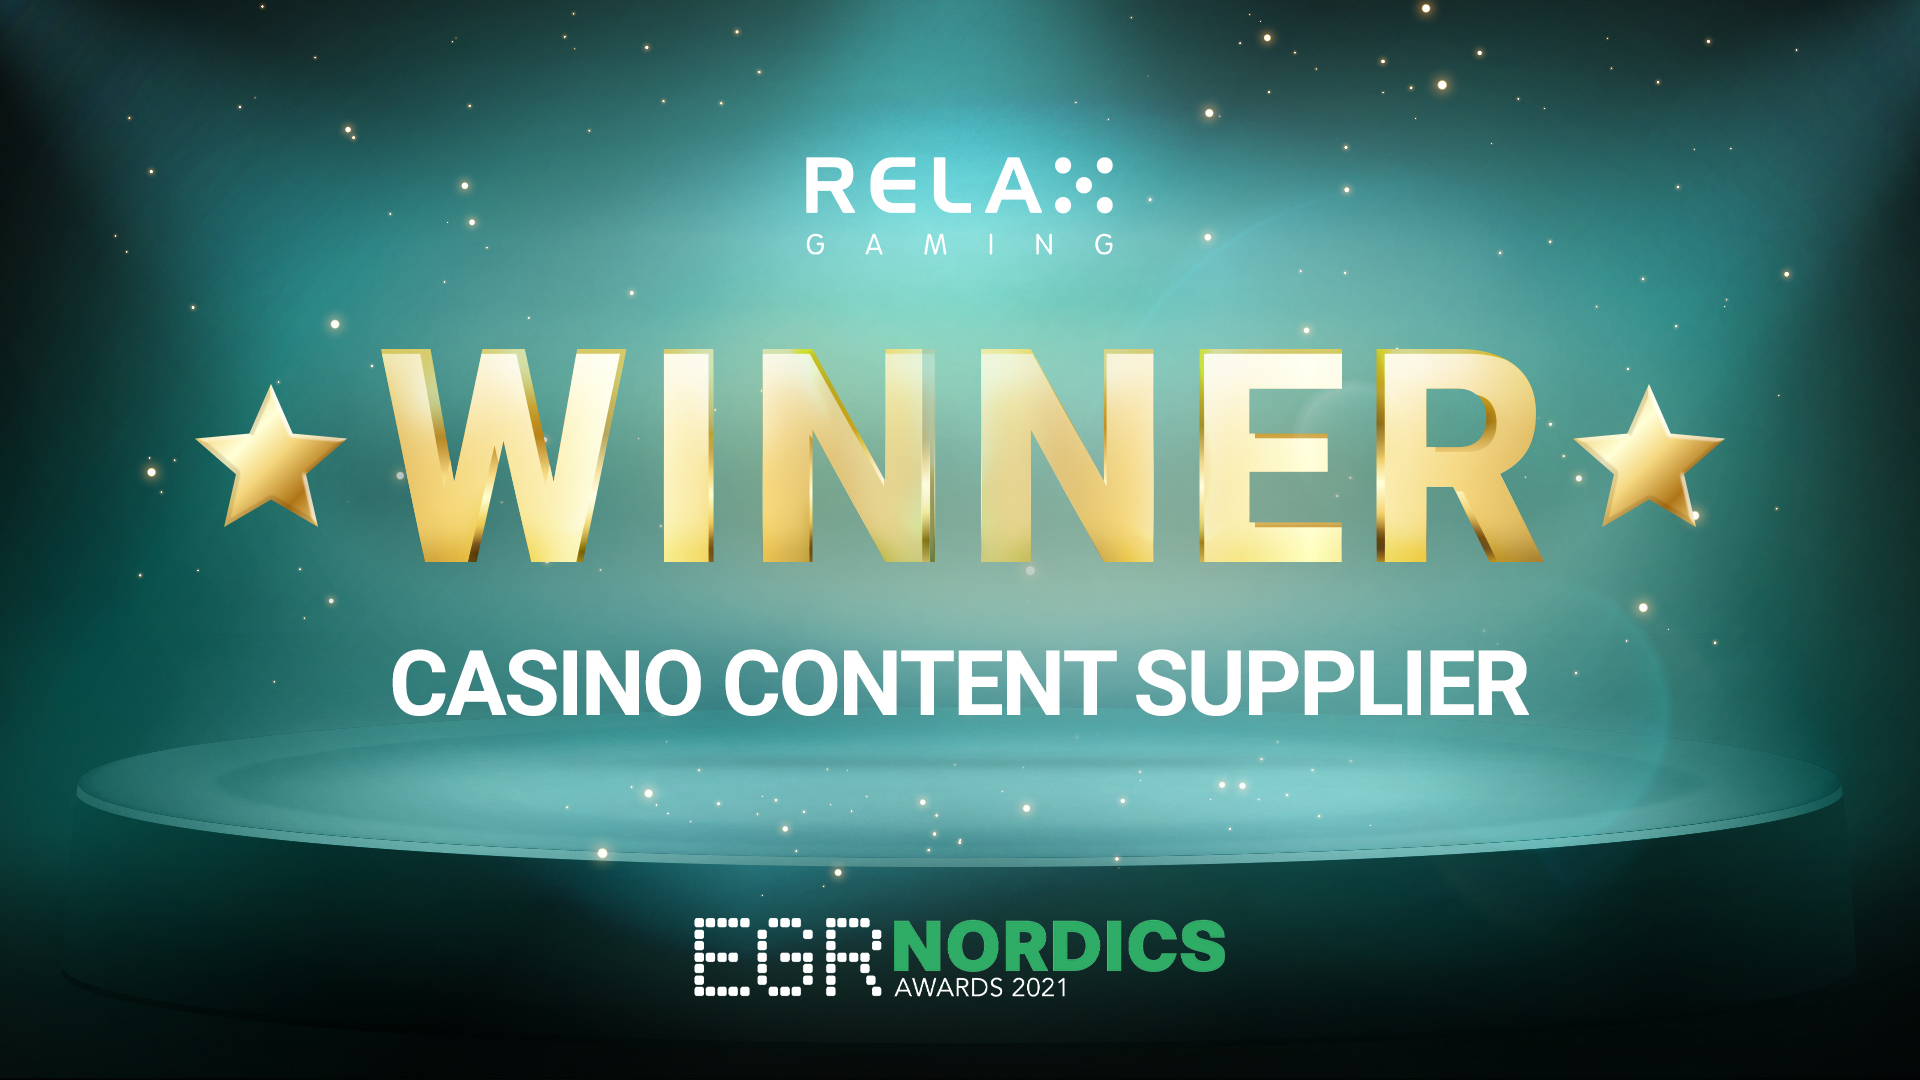 Relax Gaming sets the bar with Casino Content Supplier at EGR Nordics Awards